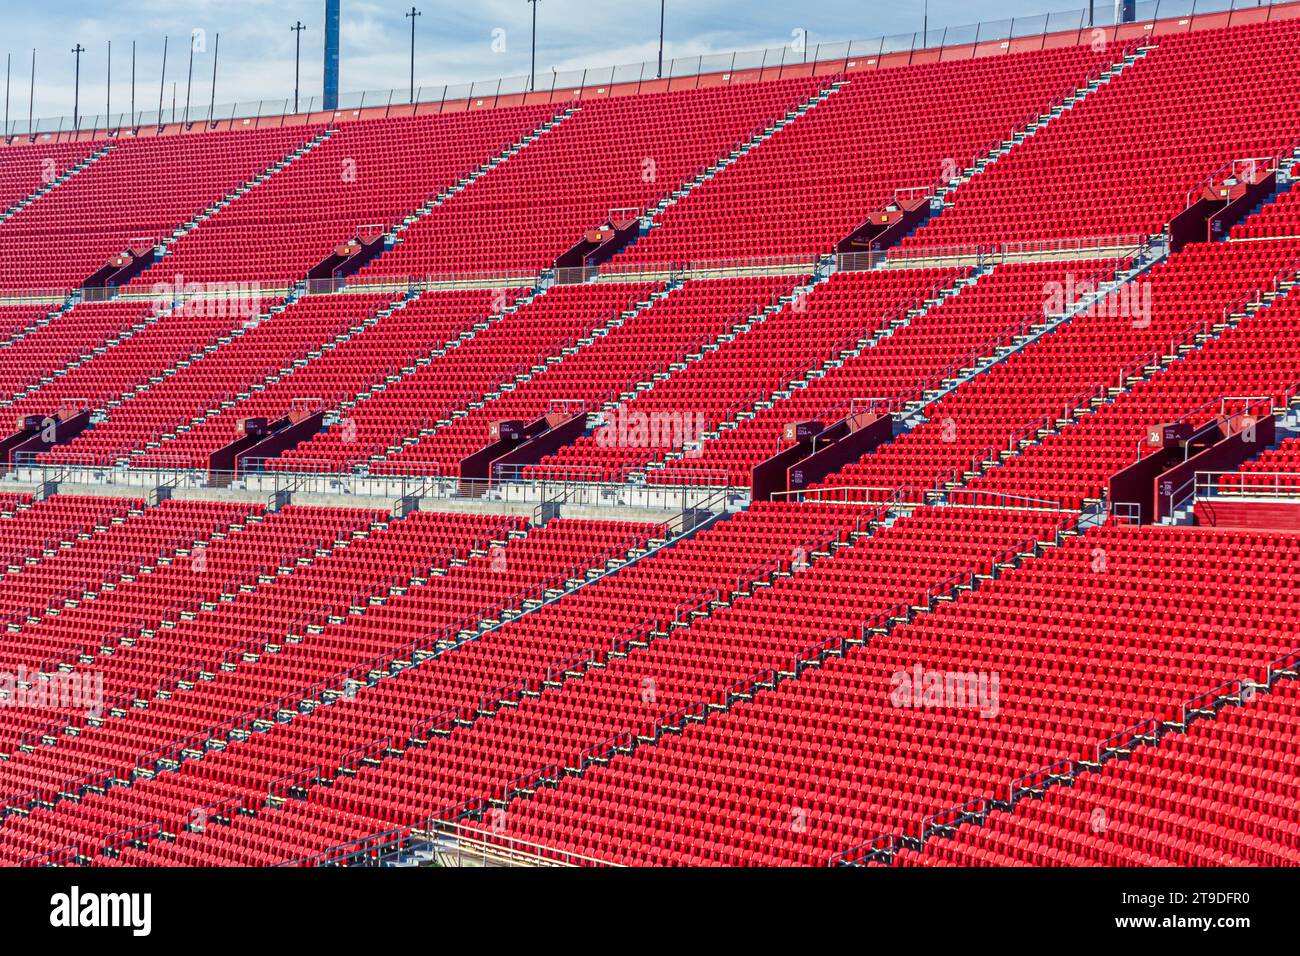 An athletic sports stadium on a sunny day with red seats Stock Photo